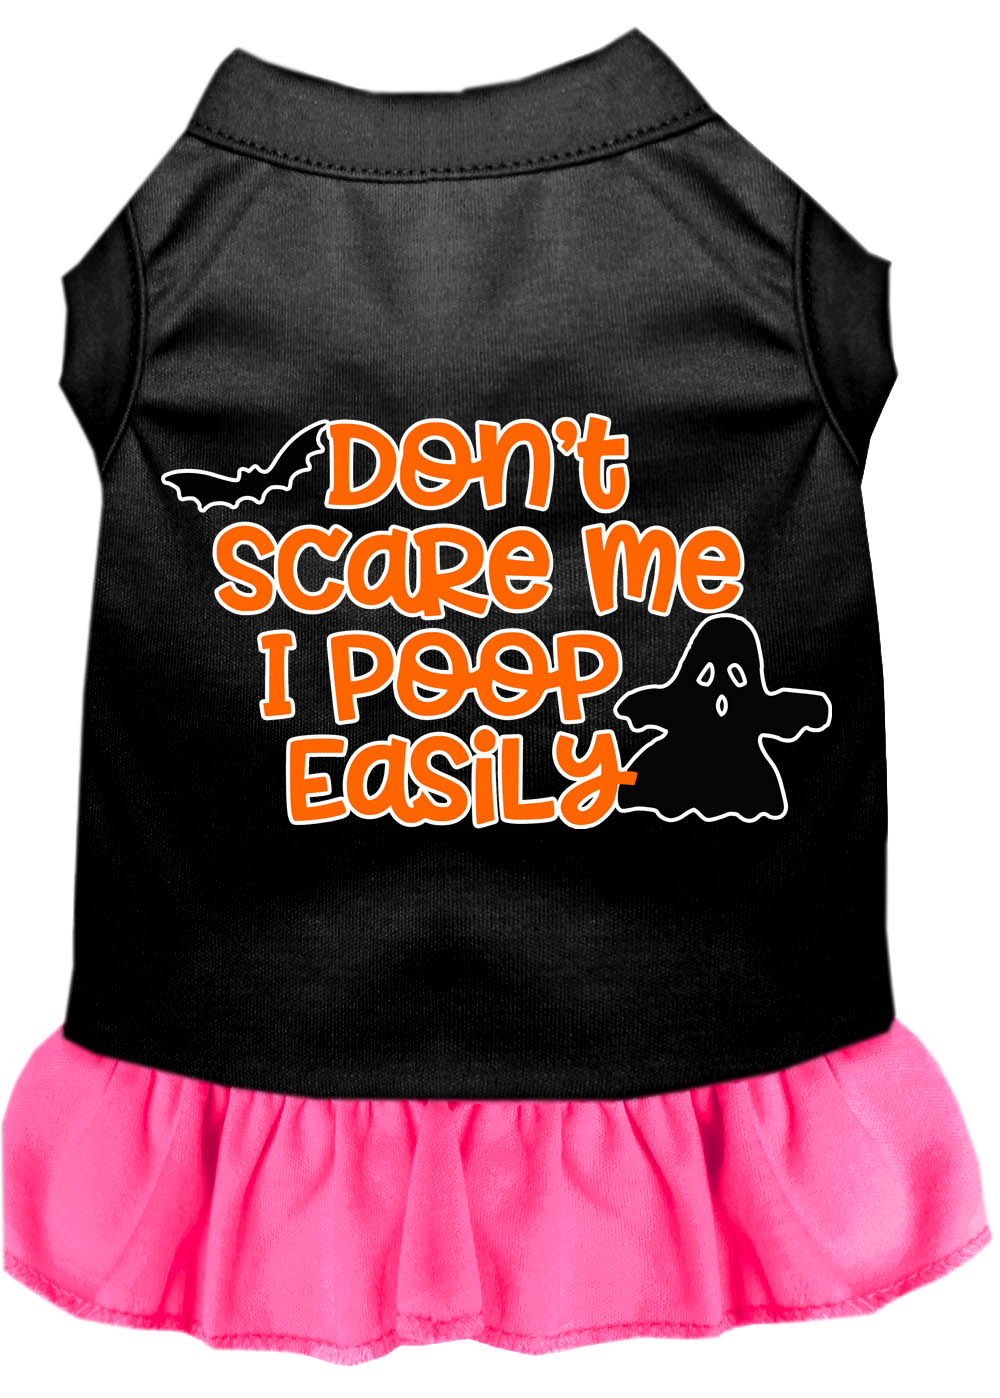 Don't Scare Me, Poops Easily Screen Print Dog Dress Black with Bright Pink Lg